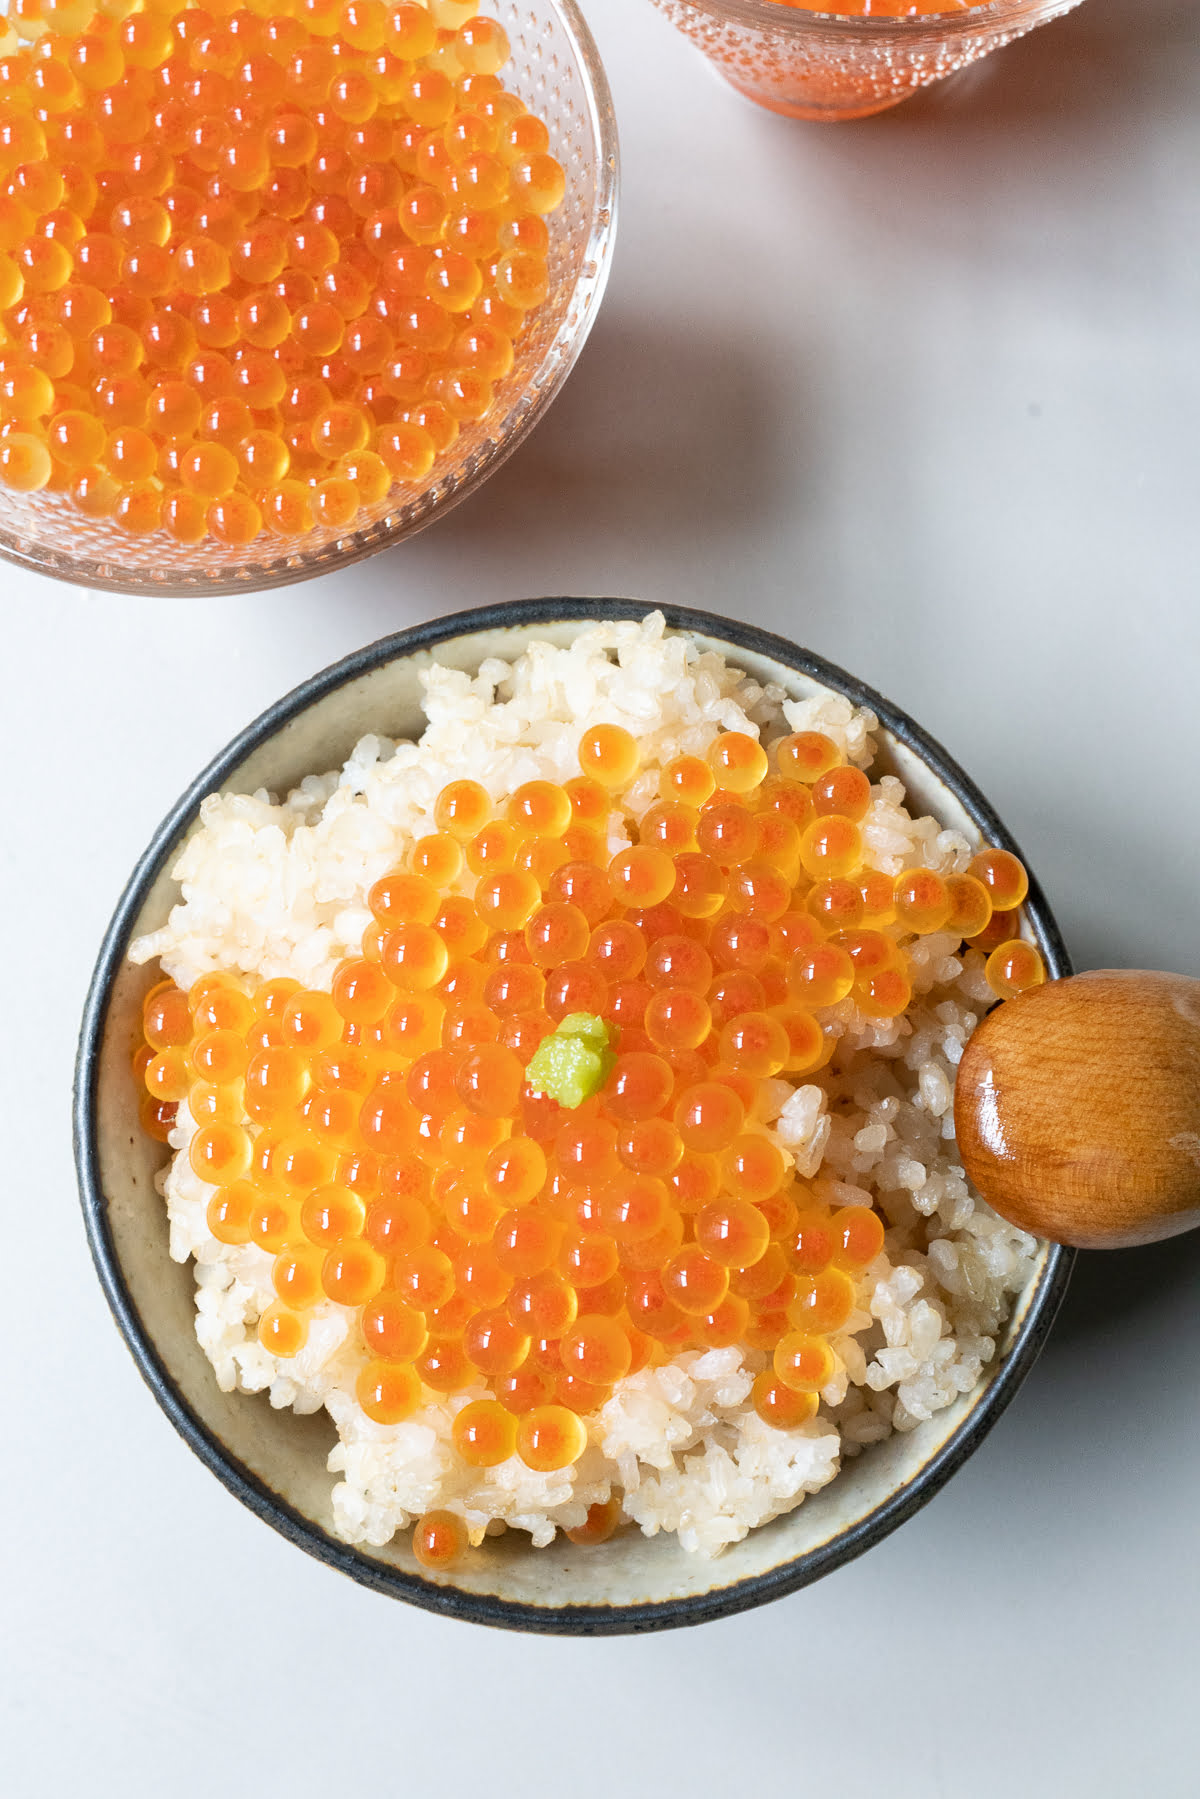 Ikura (soy sauce-cured) salmon roe over a bowl of rice with wasabi.